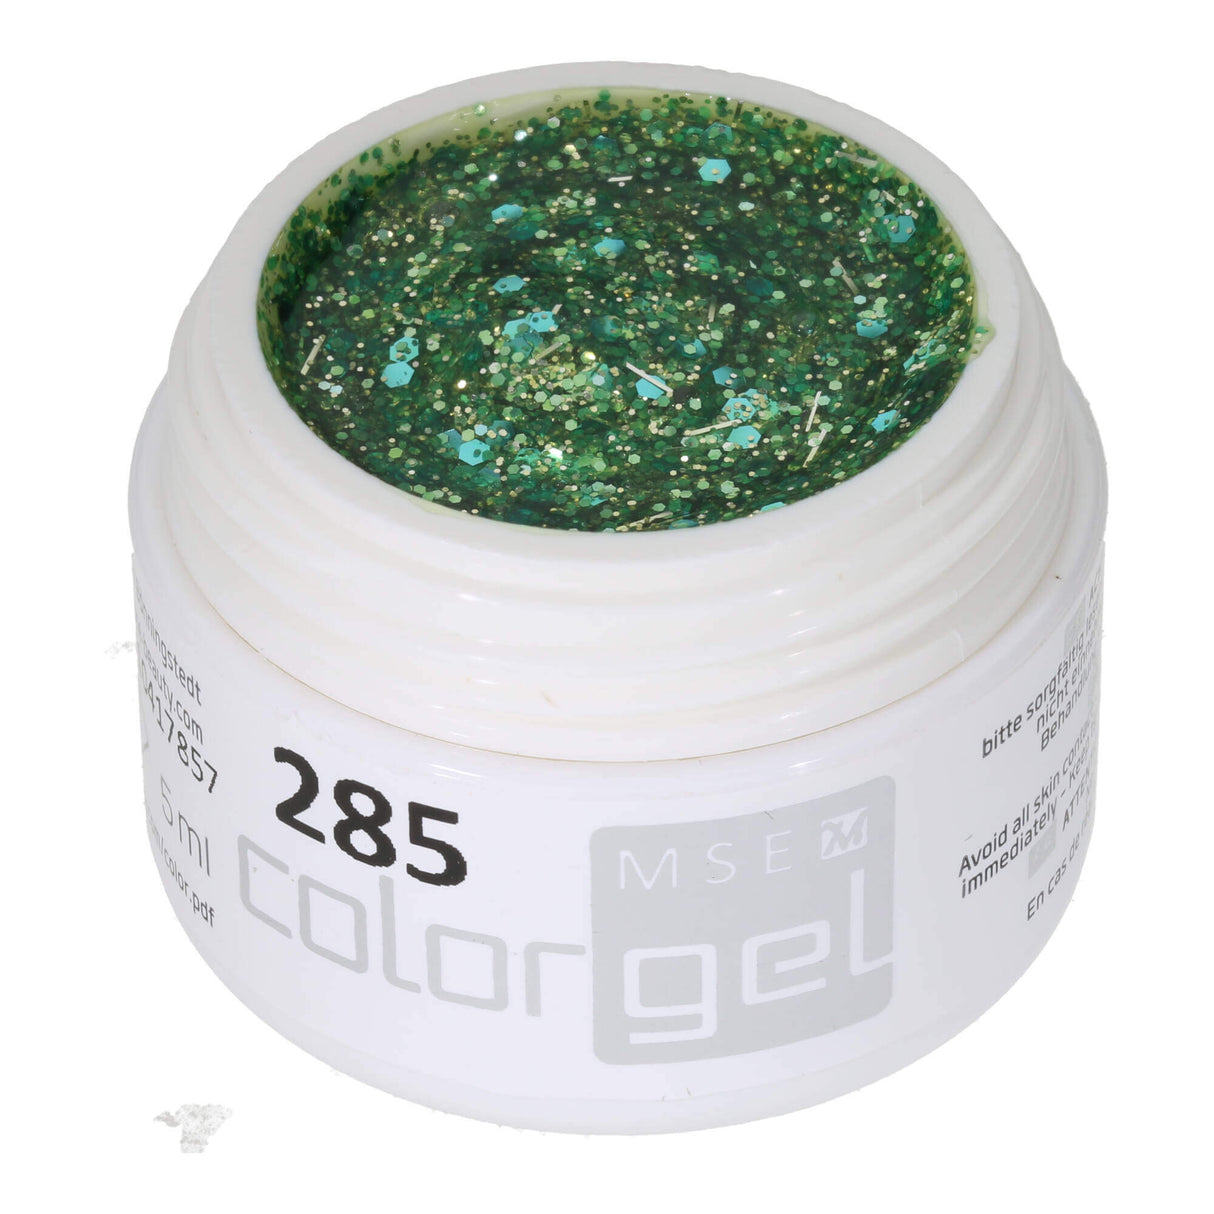 # 285 Premium-GLITTER Color Gel 5ml Mint green glitter gel mixed with turquoise glitter and silver glitter threads